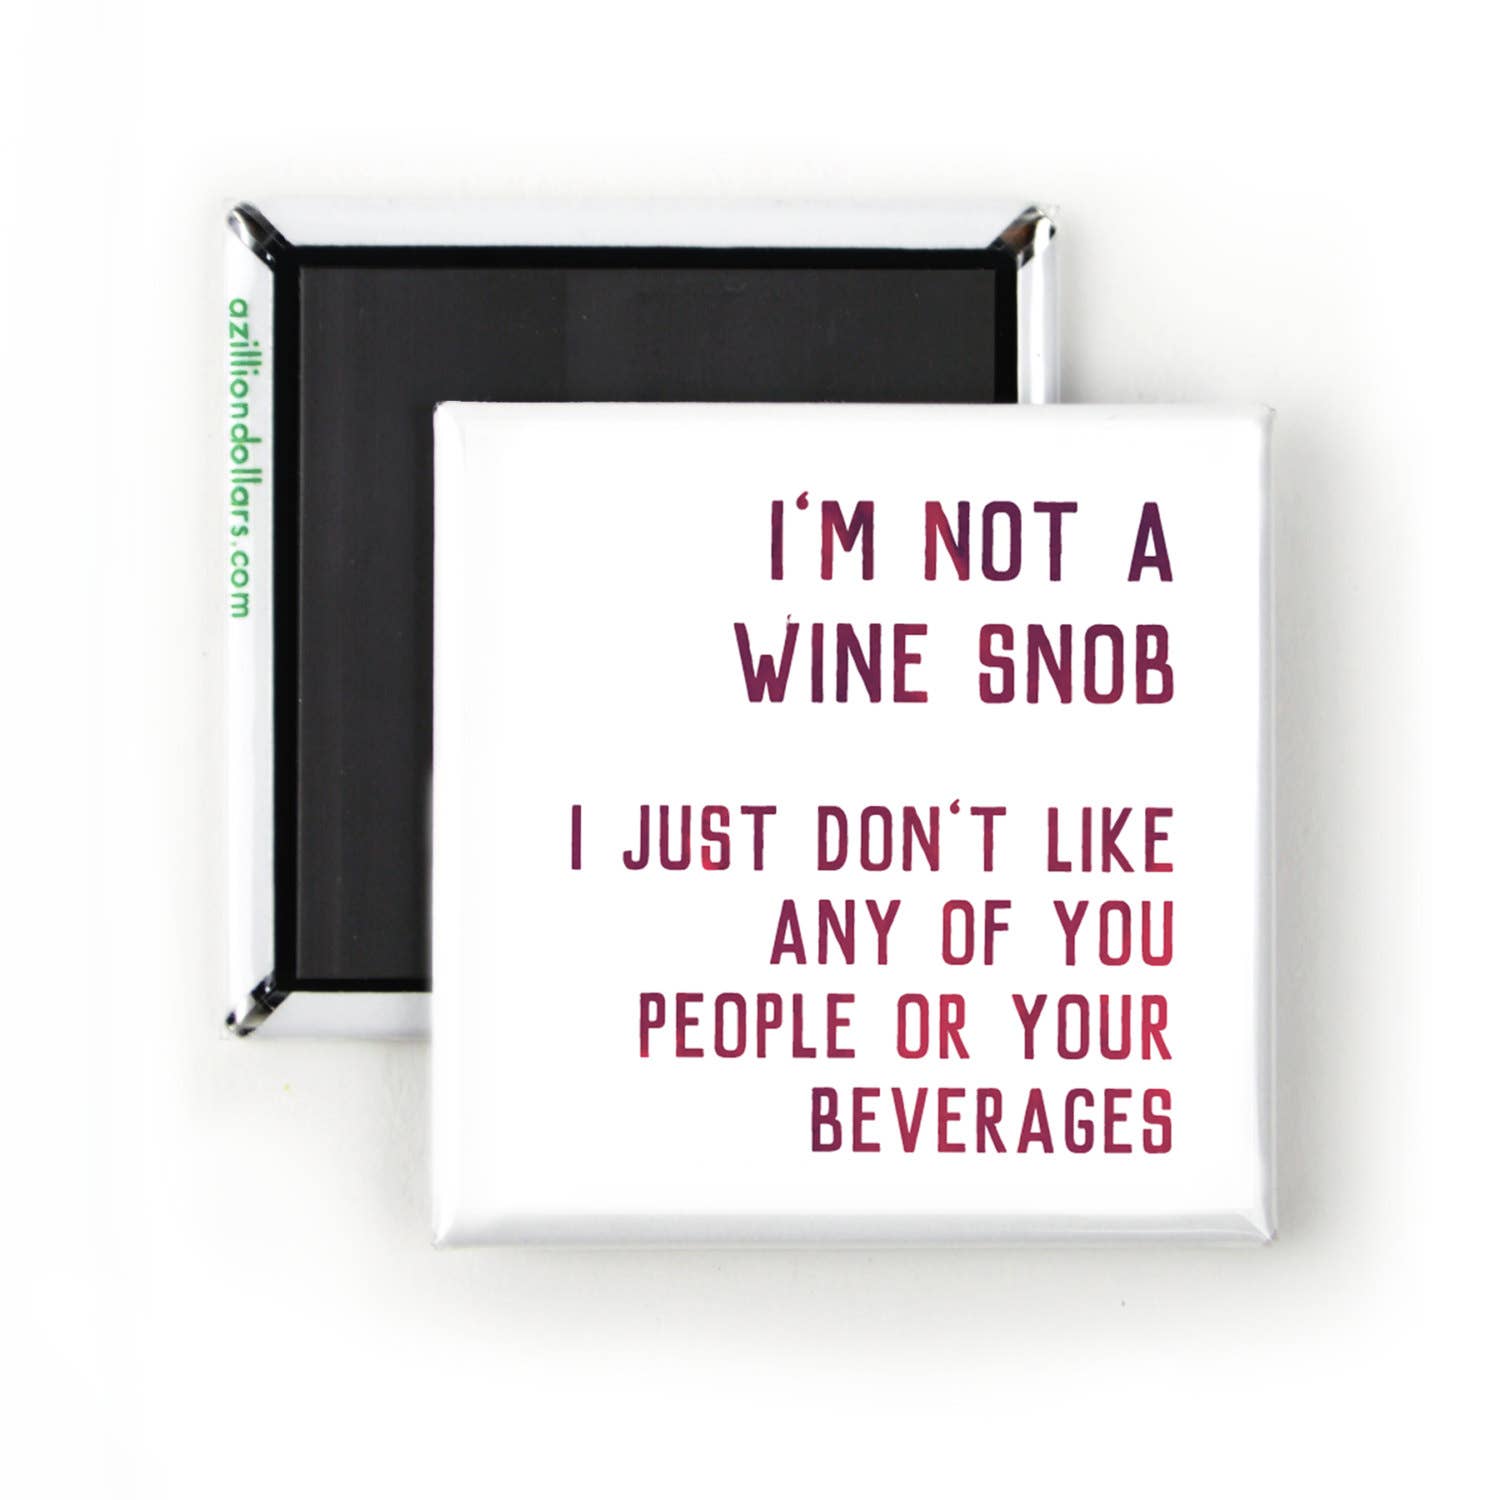 I'm Not A Wine Snob, I Just Don't Care For Any Of You People Or Your Beverages Magnet | 2" x 2" Square Mini Size